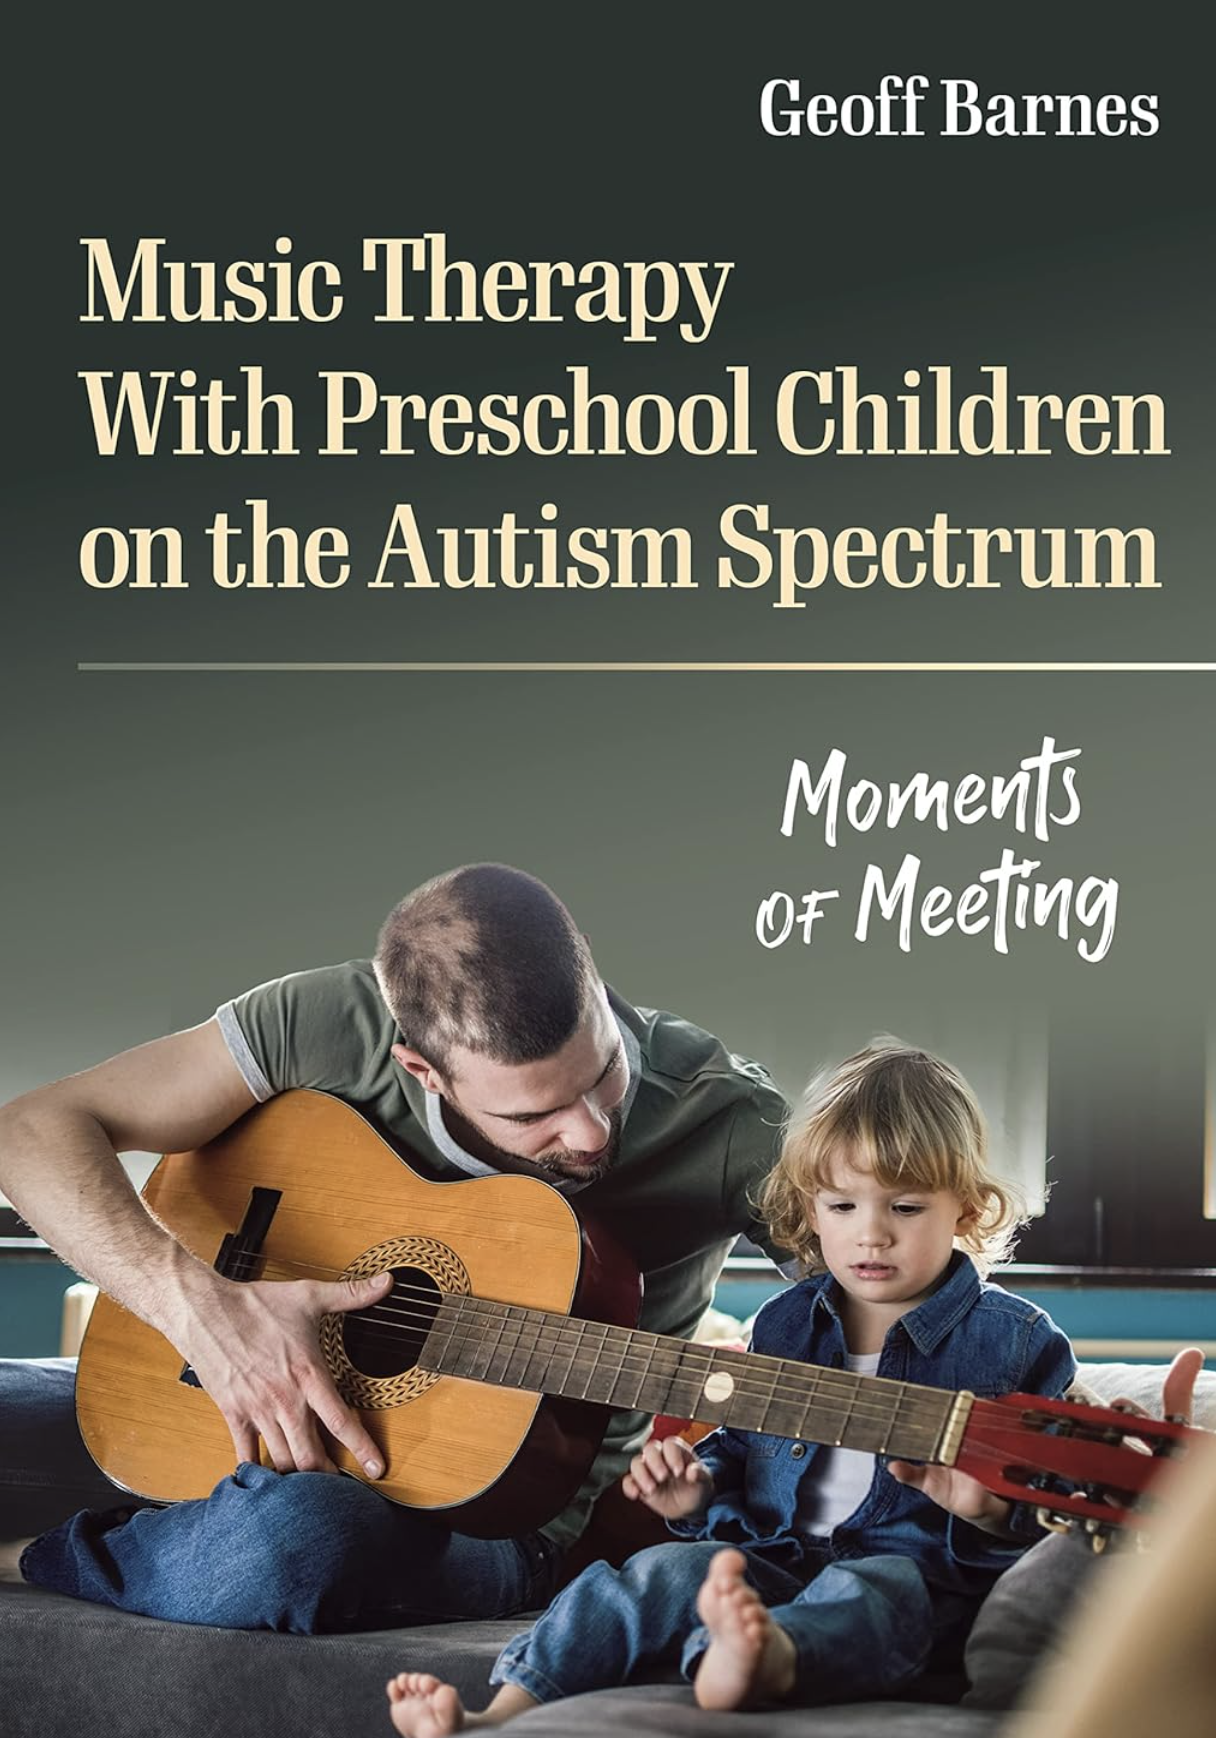 Music Therapy with Preschool Children on the Autism Spectrum- Moments of Meeting
